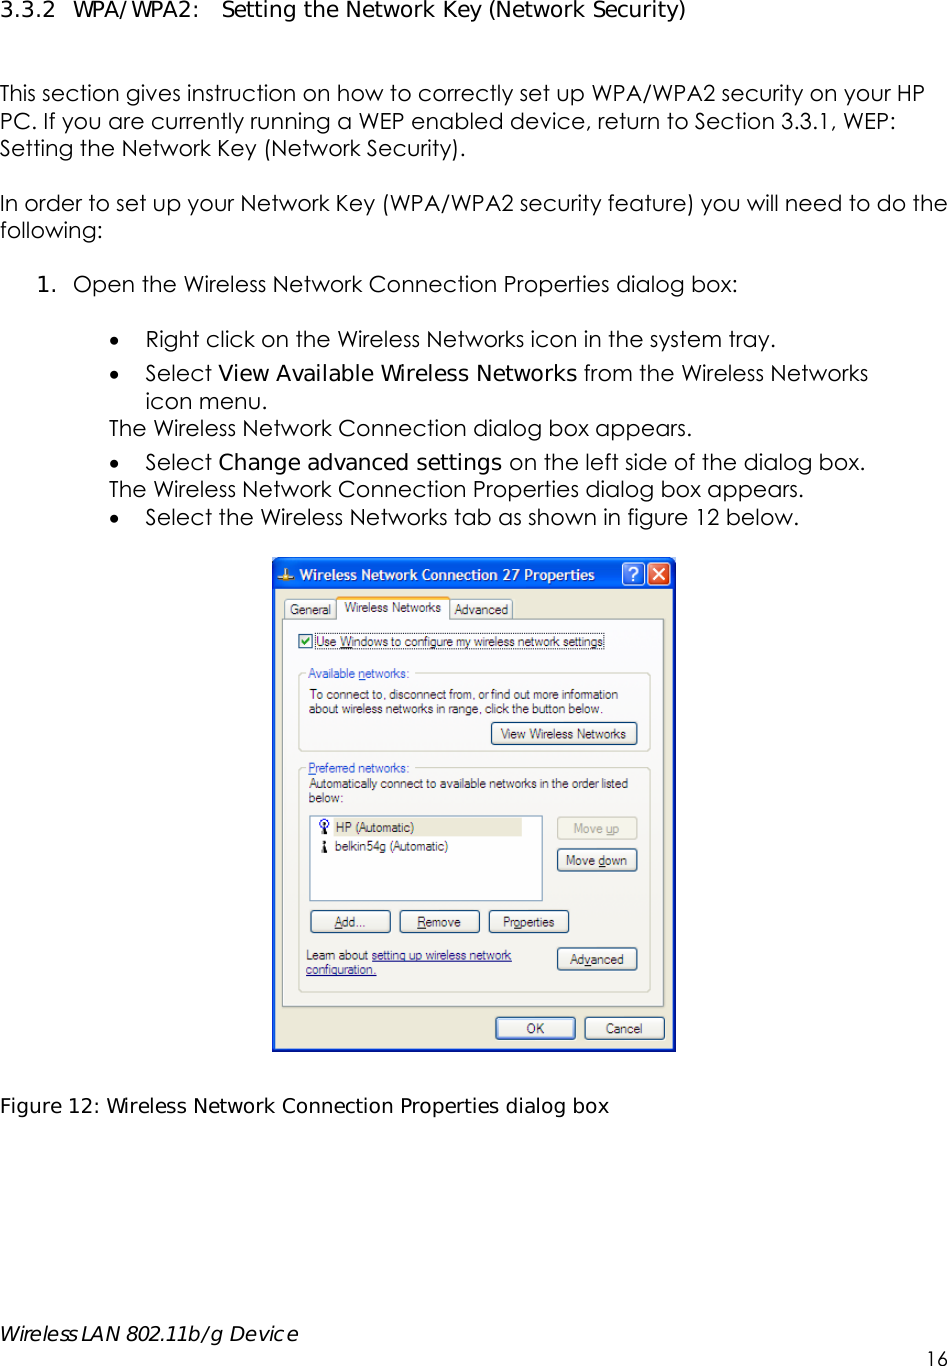     Wireless LAN 802.11b/g Device        16  3.3.2 WPA/WPA2:  Setting the Network Key (Network Security)   This section gives instruction on how to correctly set up WPA/WPA2 security on your HP PC. If you are currently running a WEP enabled device, return to Section 3.3.1, WEP: Setting the Network Key (Network Security).    In order to set up your Network Key (WPA/WPA2 security feature) you will need to do the following:  1. Open the Wireless Network Connection Properties dialog box:   Right click on the Wireless Networks icon in the system tray.  Select View Available Wireless Networks from the Wireless Networks   icon menu. The Wireless Network Connection dialog box appears.  Select Change advanced settings on the left side of the dialog box. The Wireless Network Connection Properties dialog box appears.  Select the Wireless Networks tab as shown in figure 12 below.    Figure 12: Wireless Network Connection Properties dialog box 